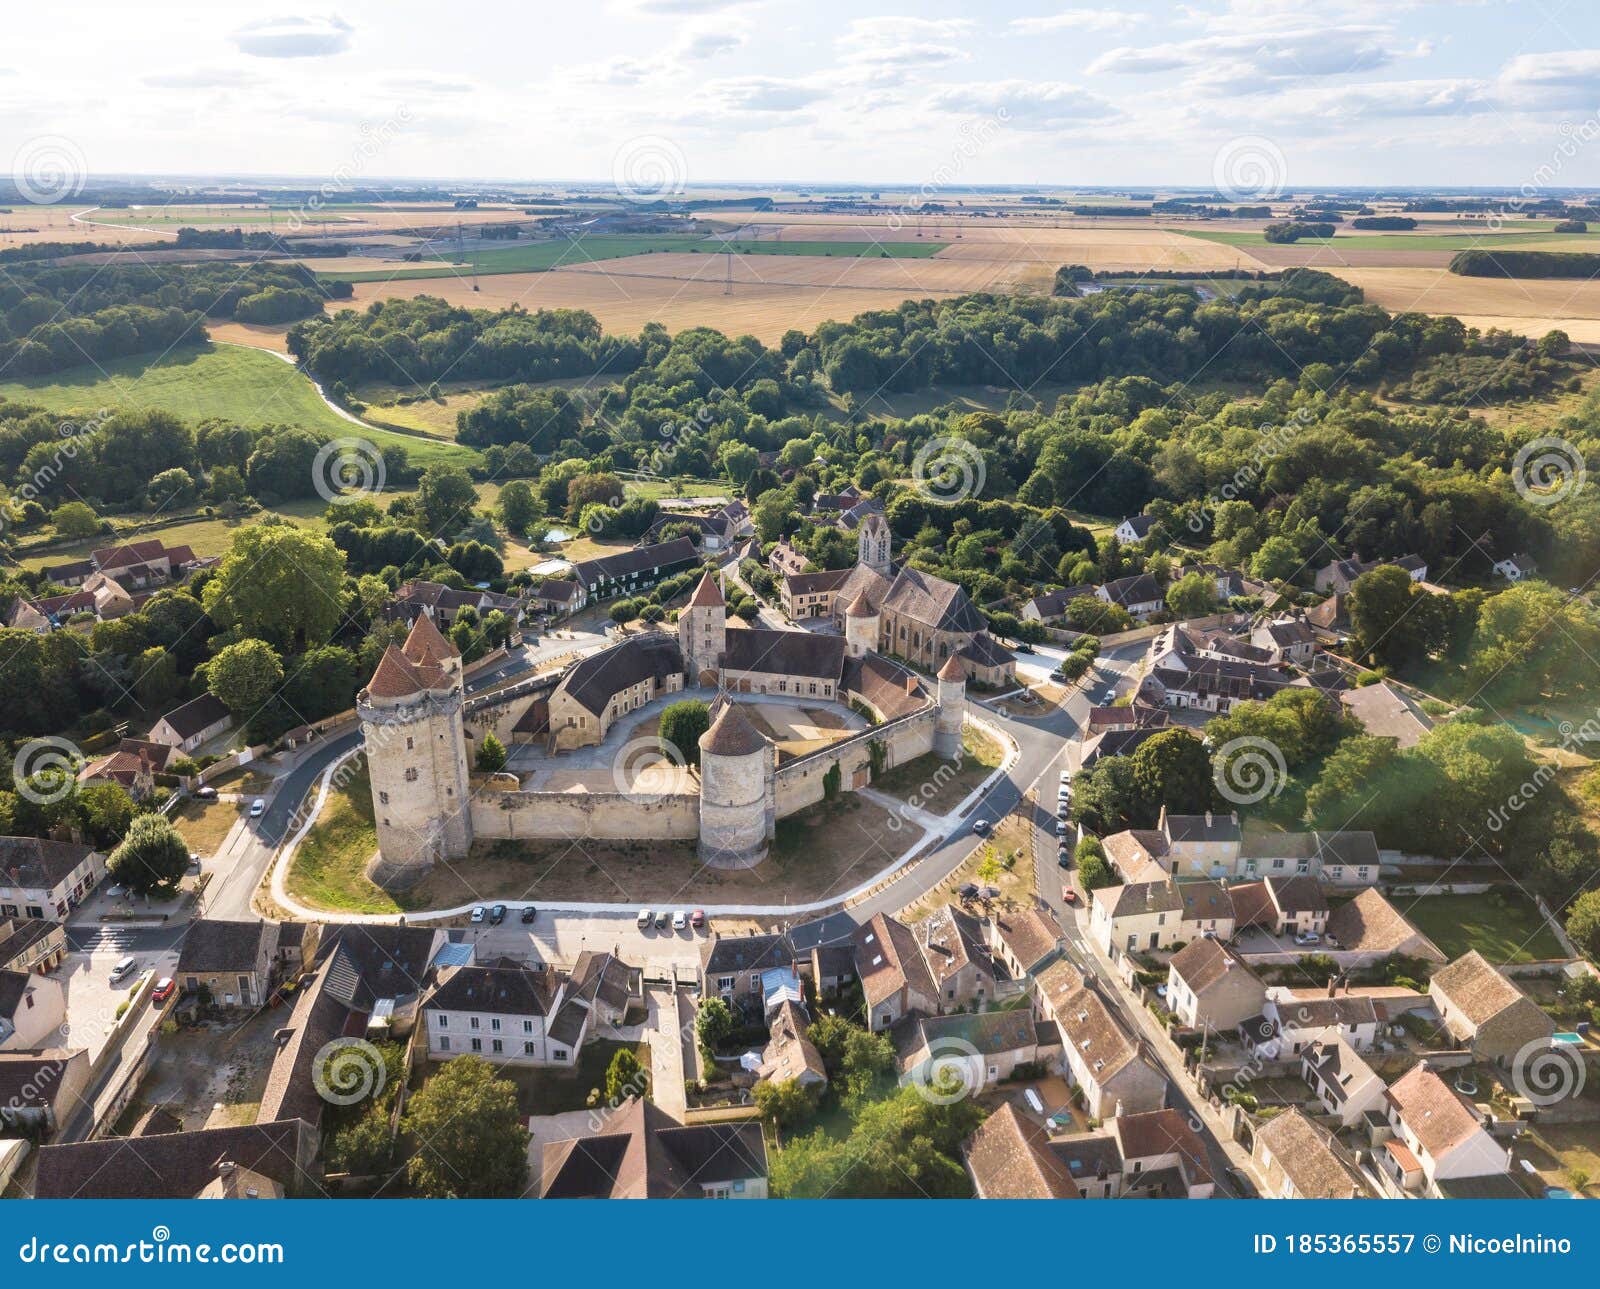 medieval castle with fortified walls, towers and donjon in rural village in france, aerial view from drone of renovated fortress